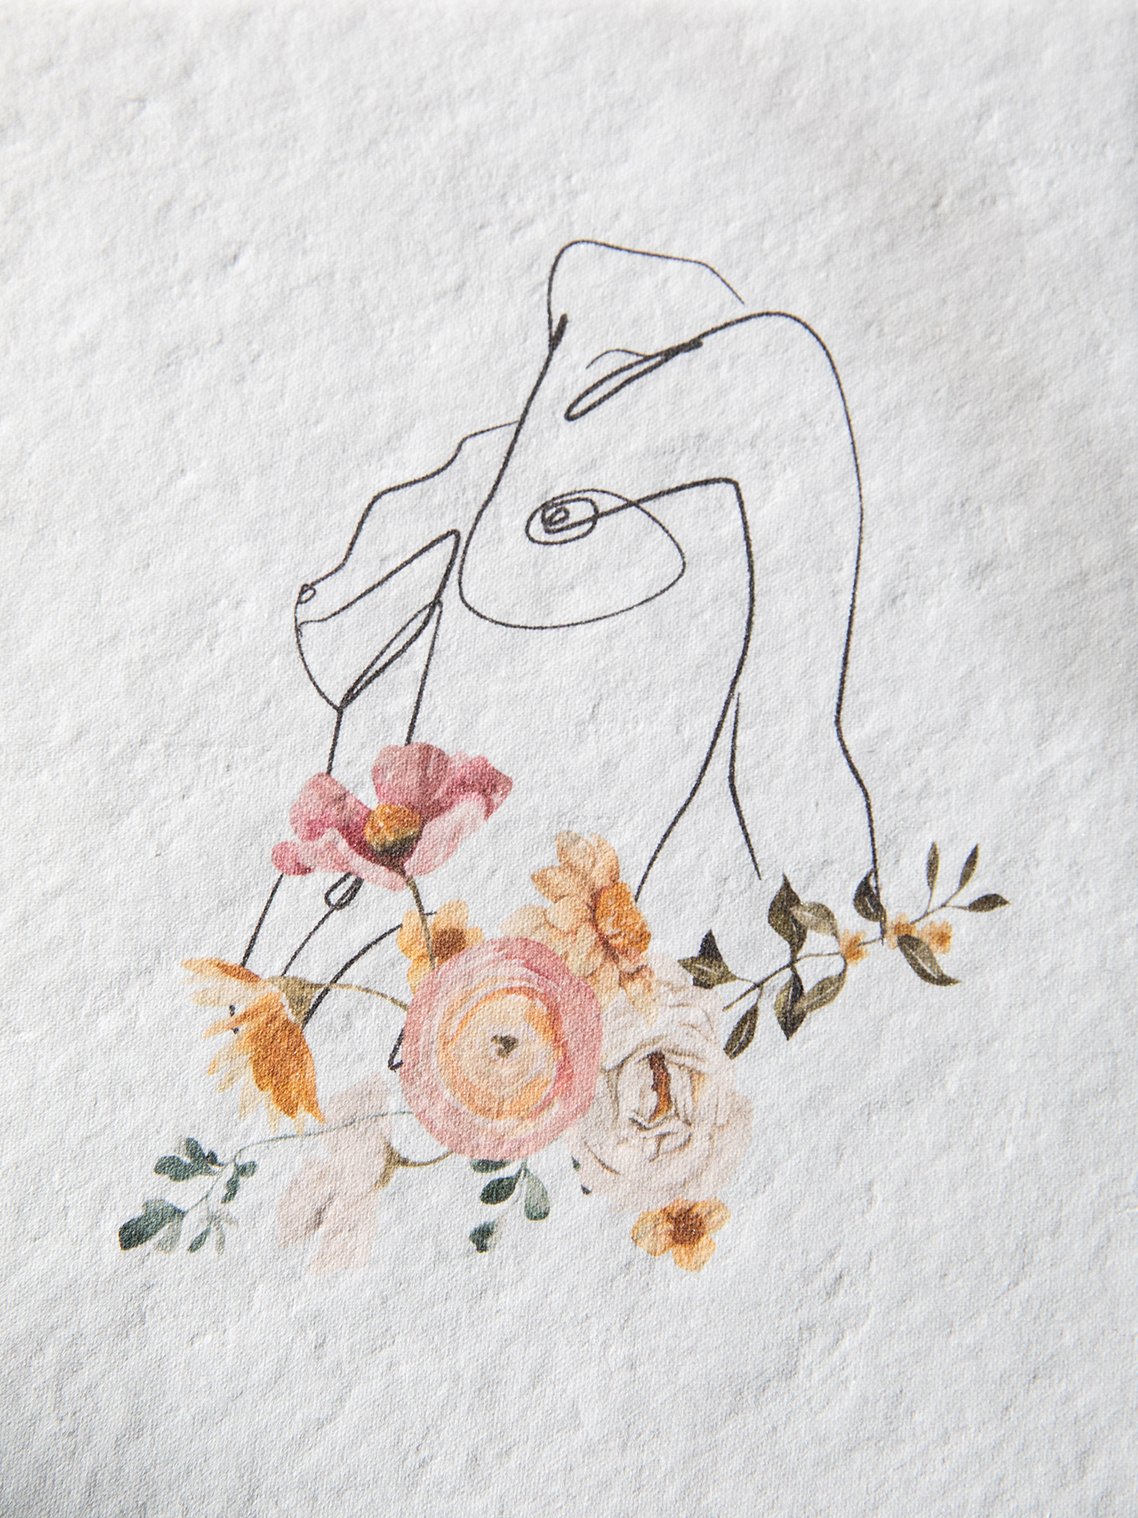 Female line art and Flowers Print No.1 - Feathers and Stone